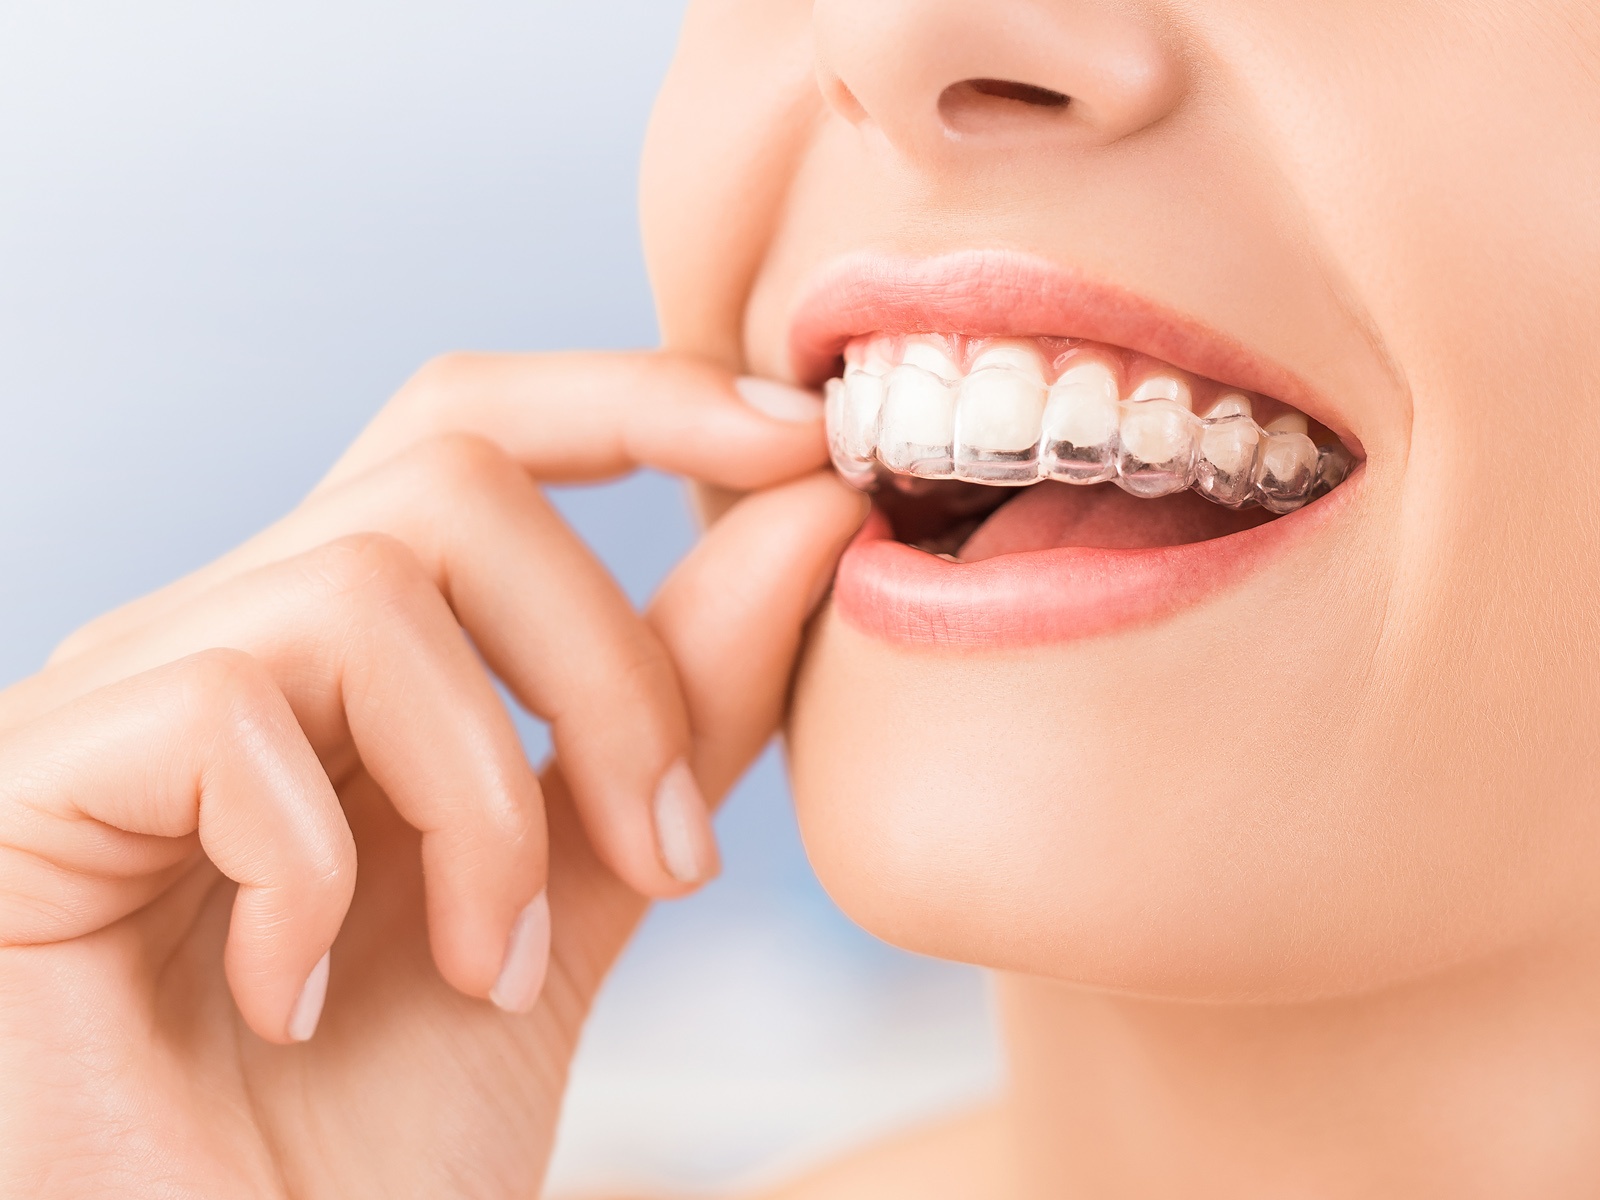 How many aligners do you get with Invisalign Lite?